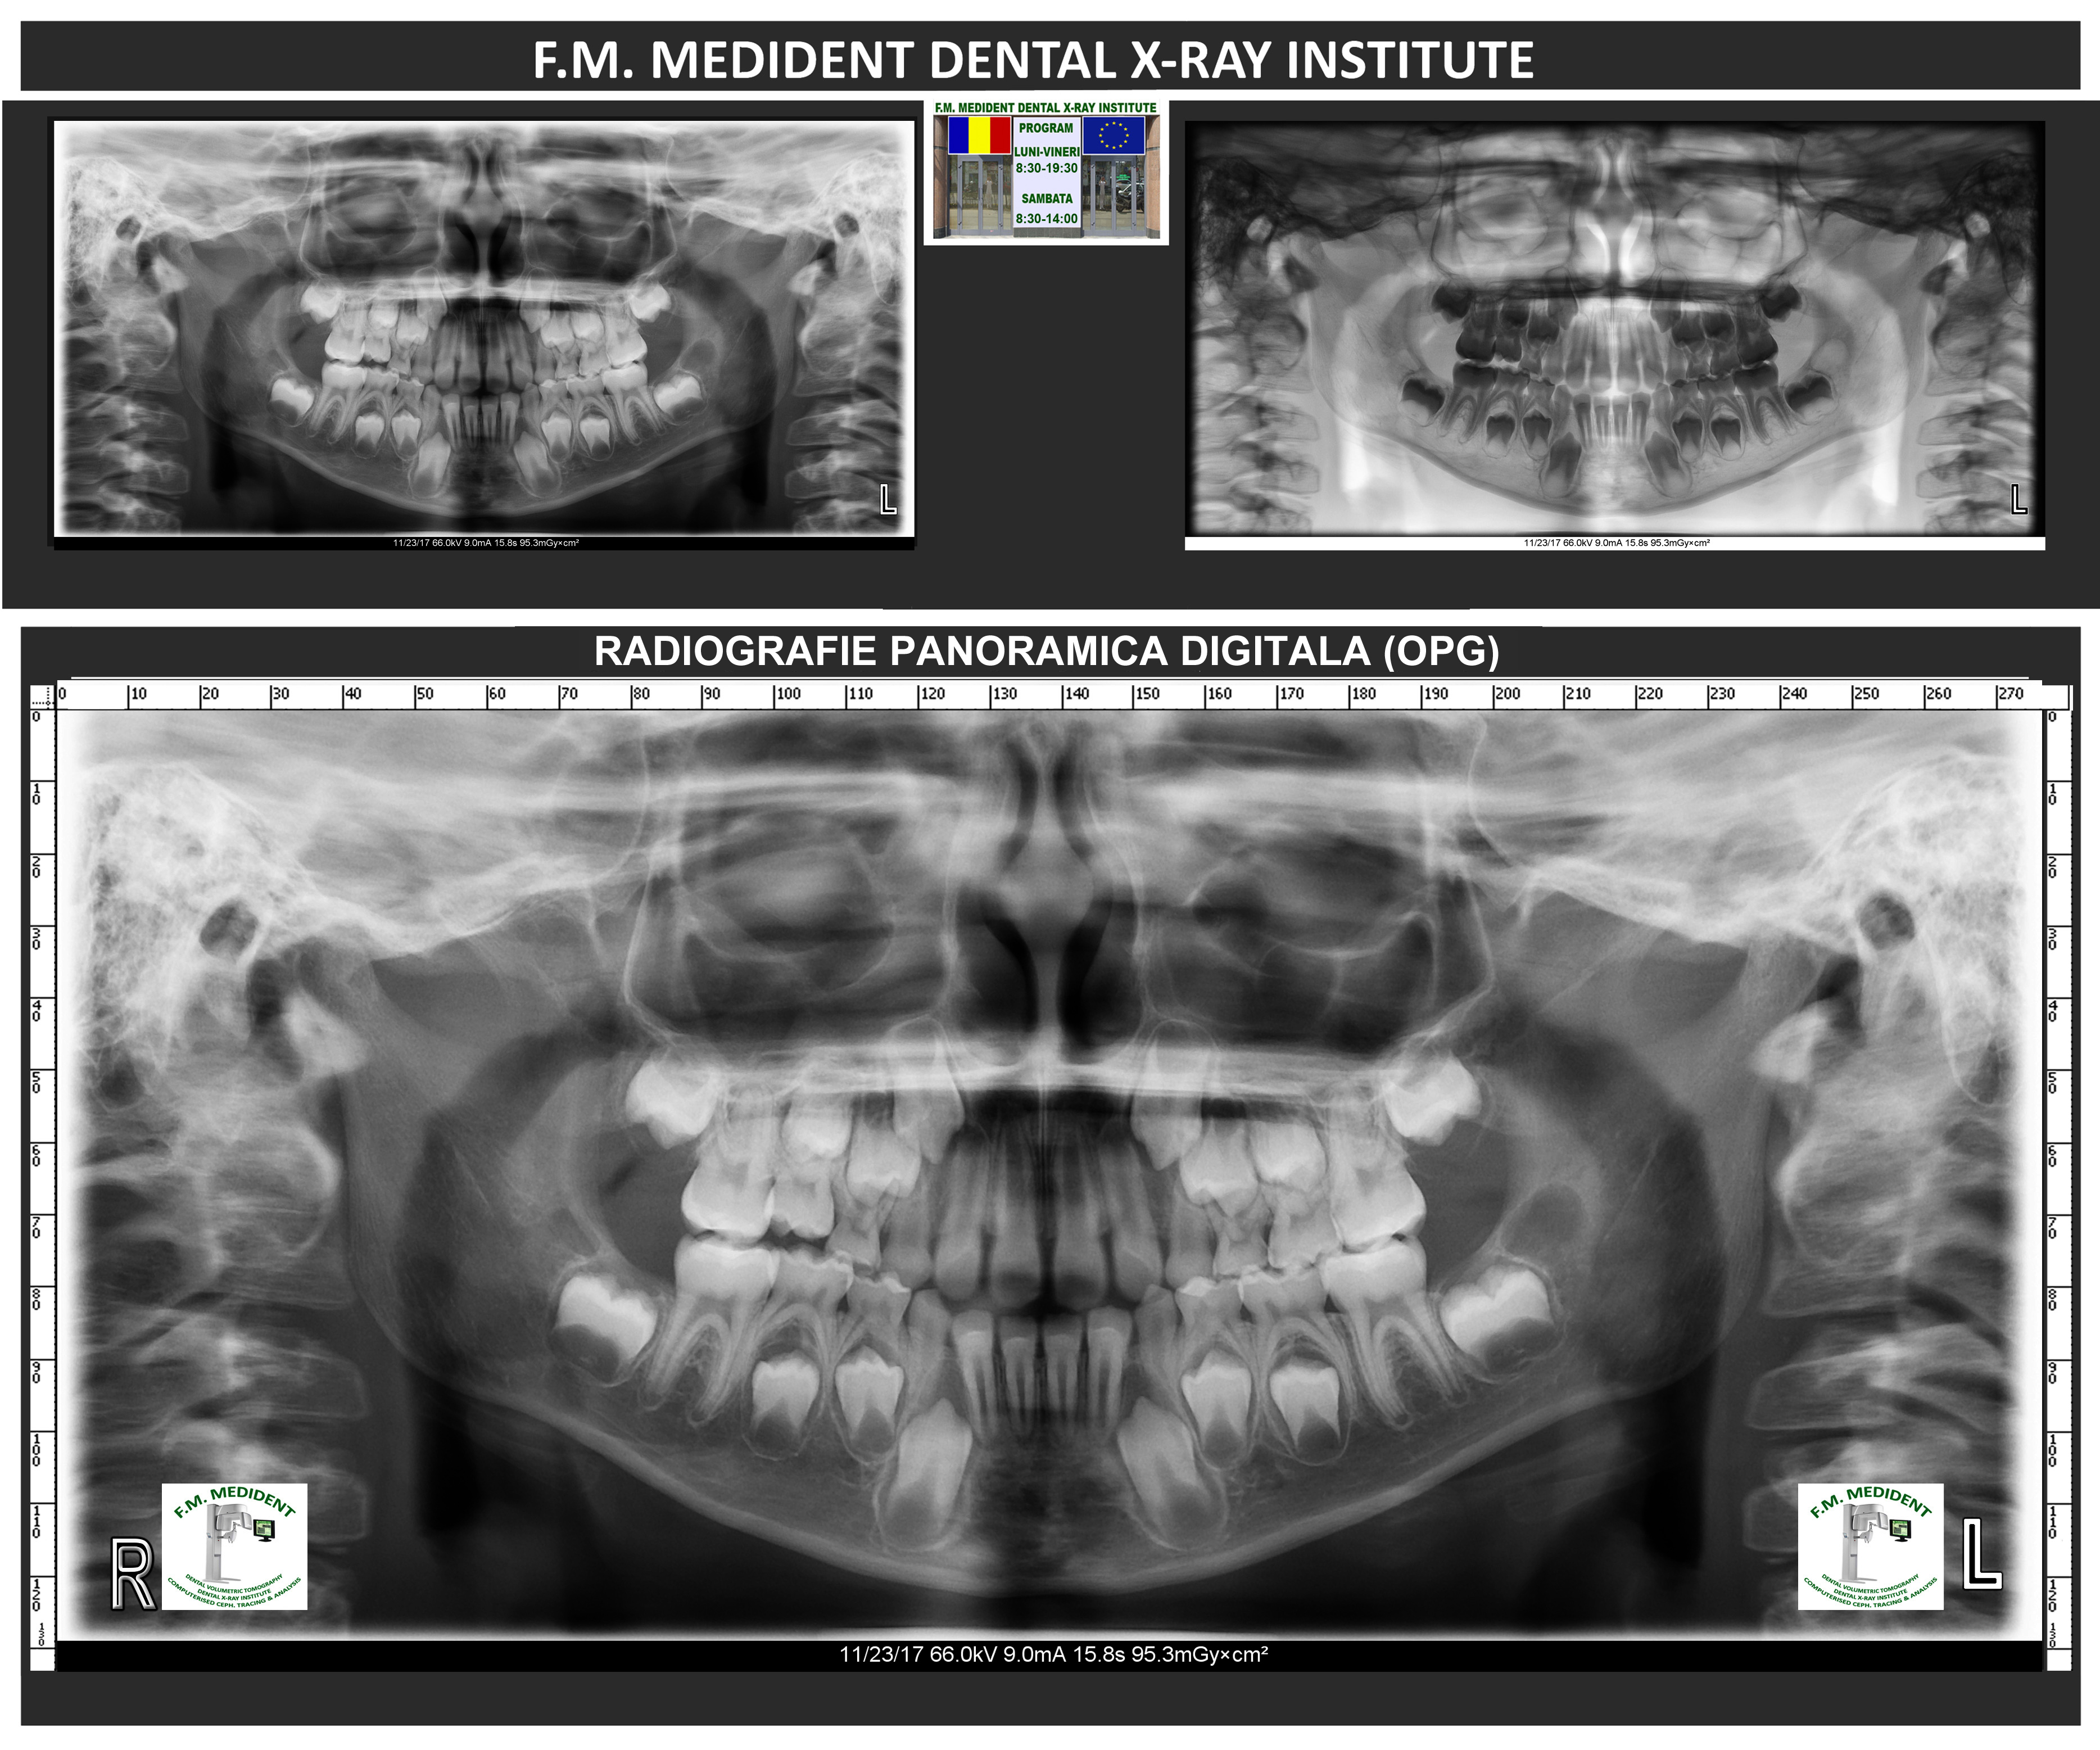 Digital panoramic radiography - in occlusion